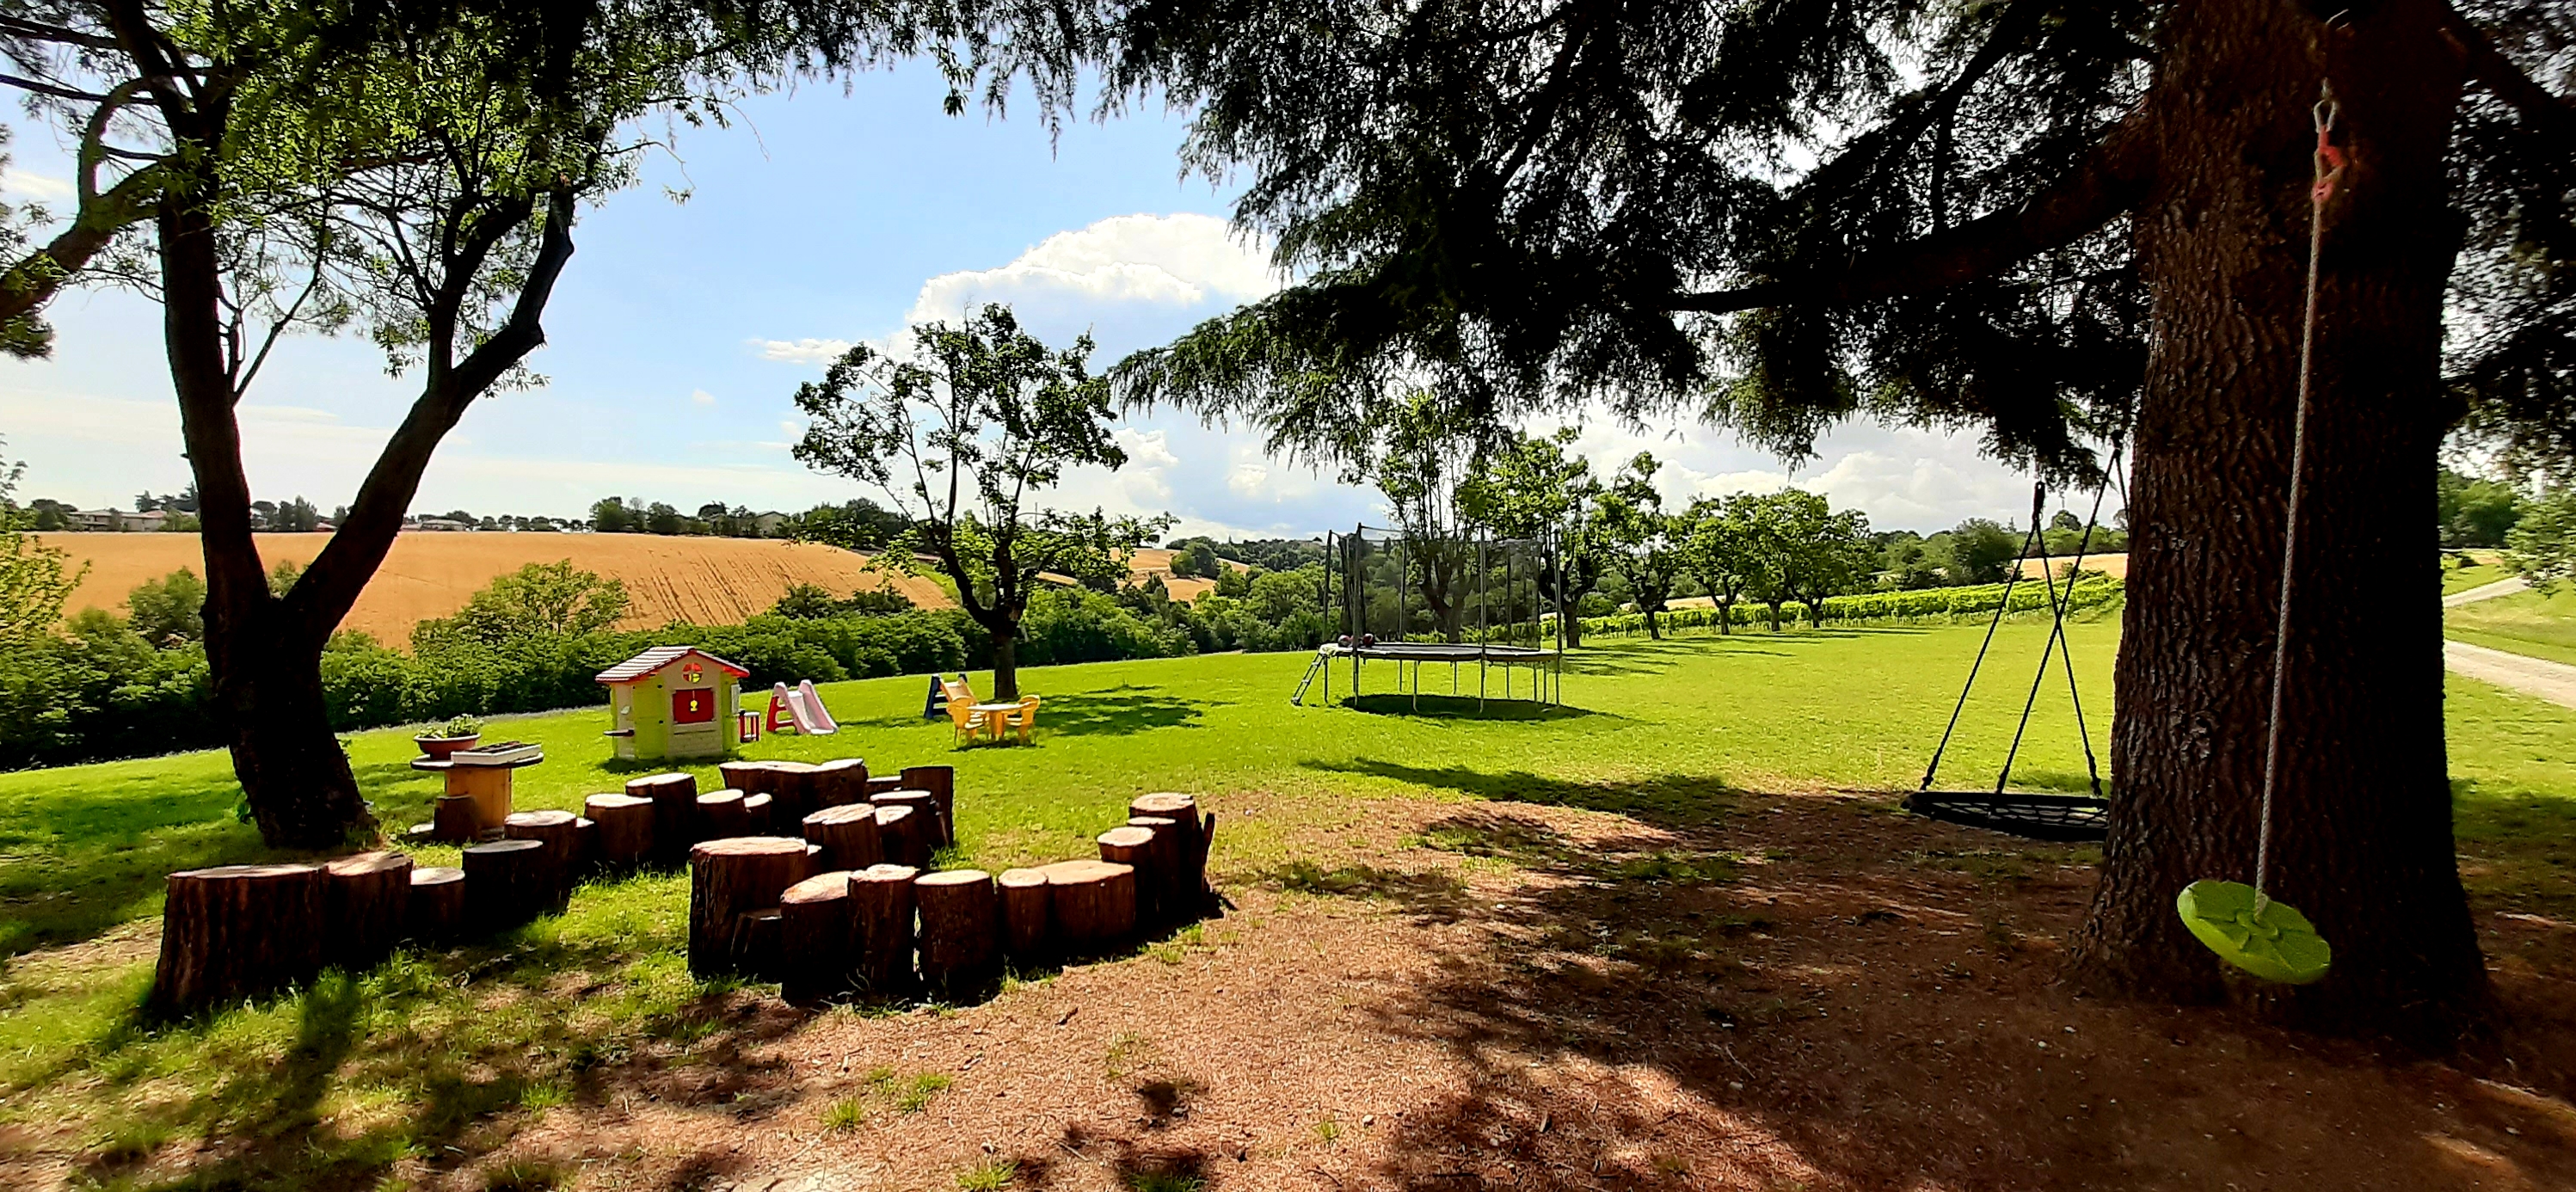 Camping Area with Farm in the hills of Bologna